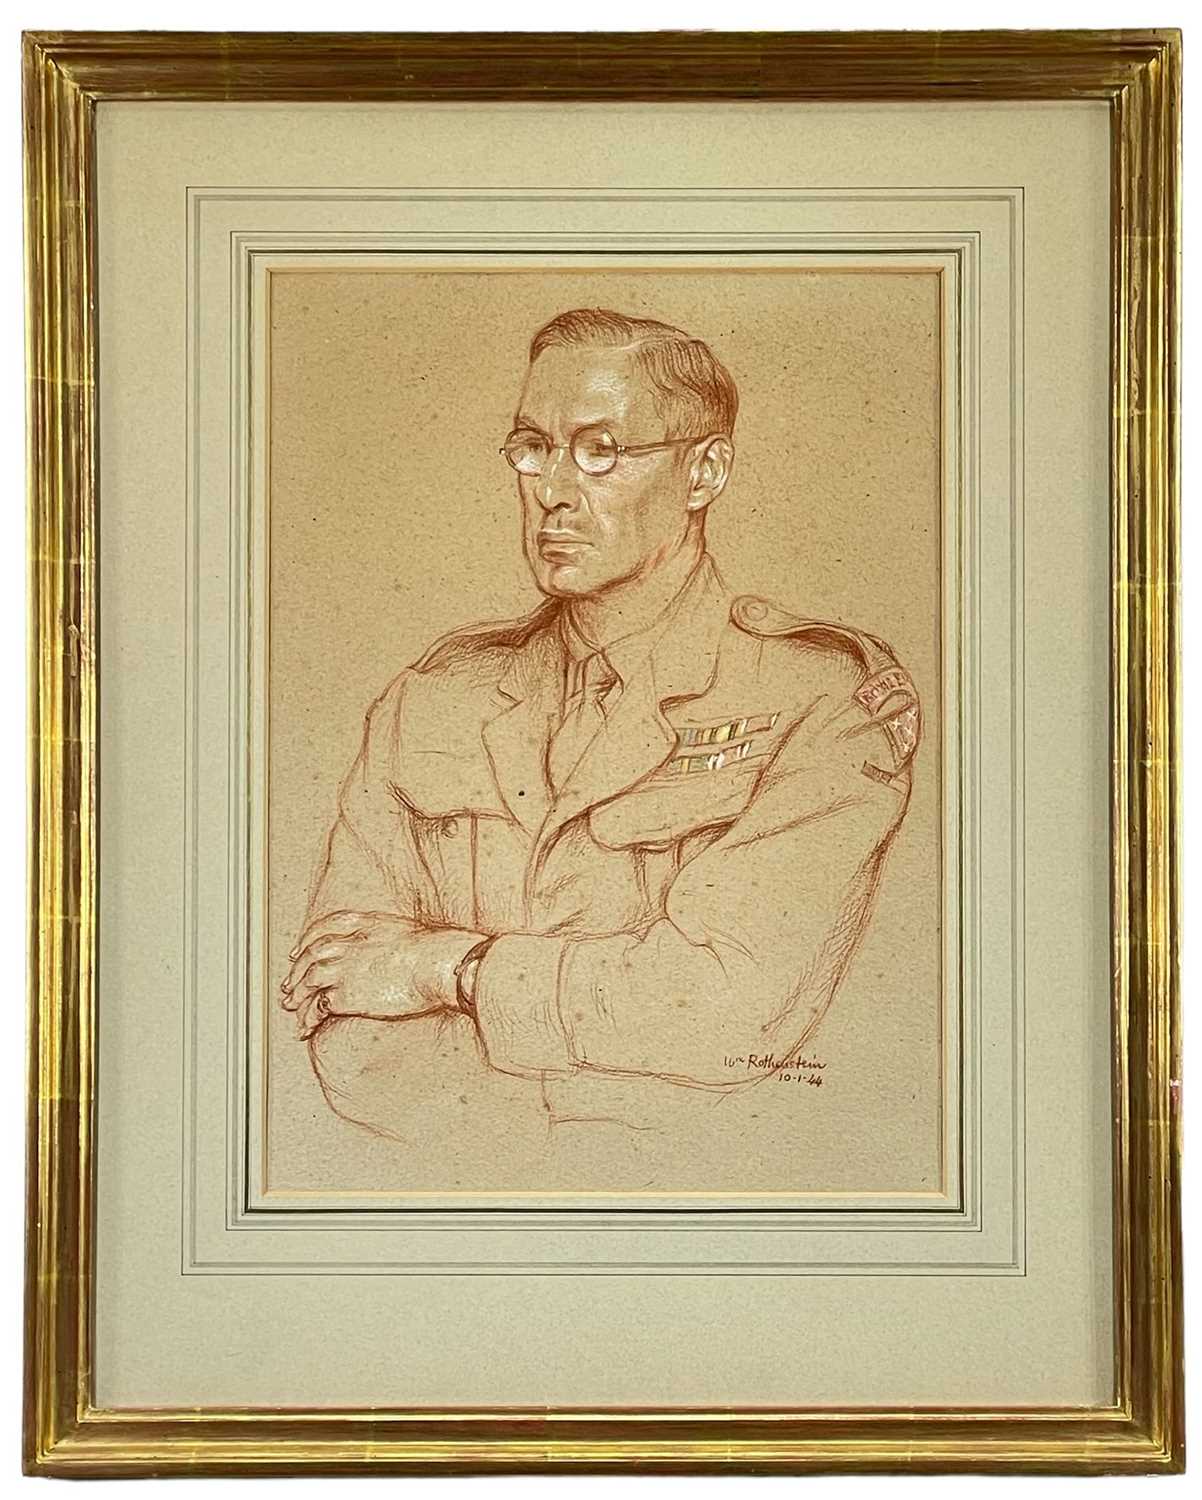 ‡ WILLIAM ROTHENSTEIN (British, 1872-1945) red and white chalk on paper - half portrait of an Army - Image 2 of 2